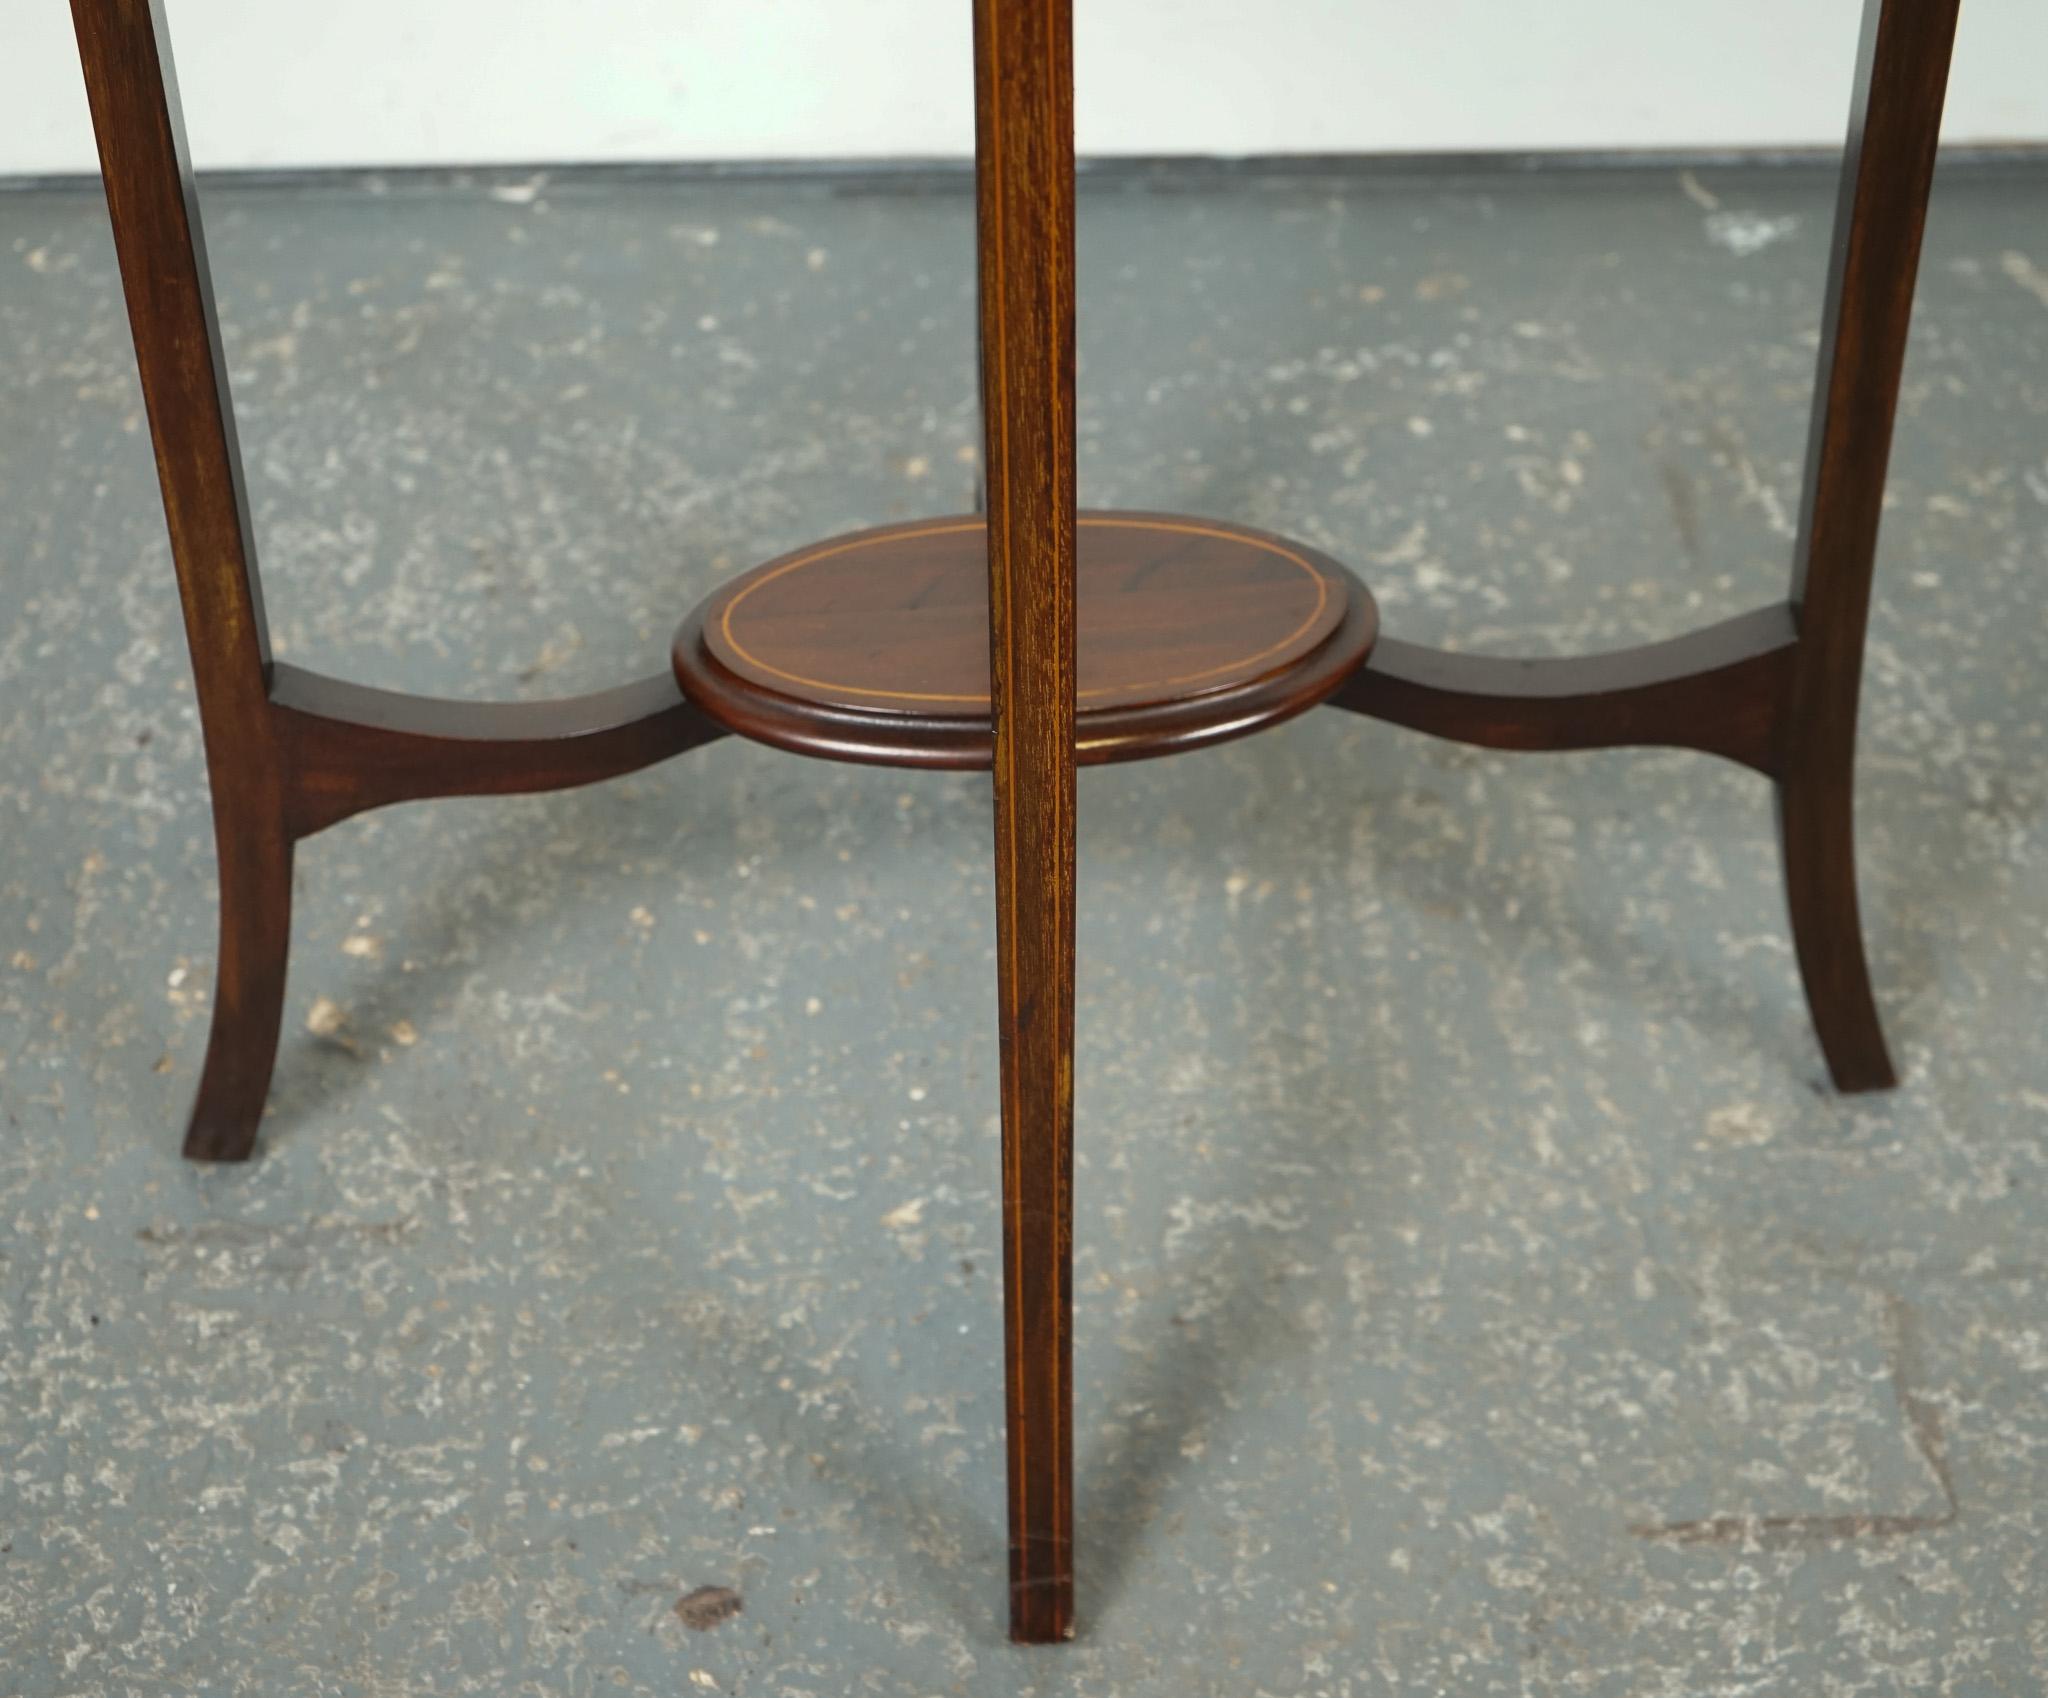 LOVELY ANTIQUE OVAL HARDWOOD SiDE PLANT TABLE J1 In Good Condition For Sale In Pulborough, GB